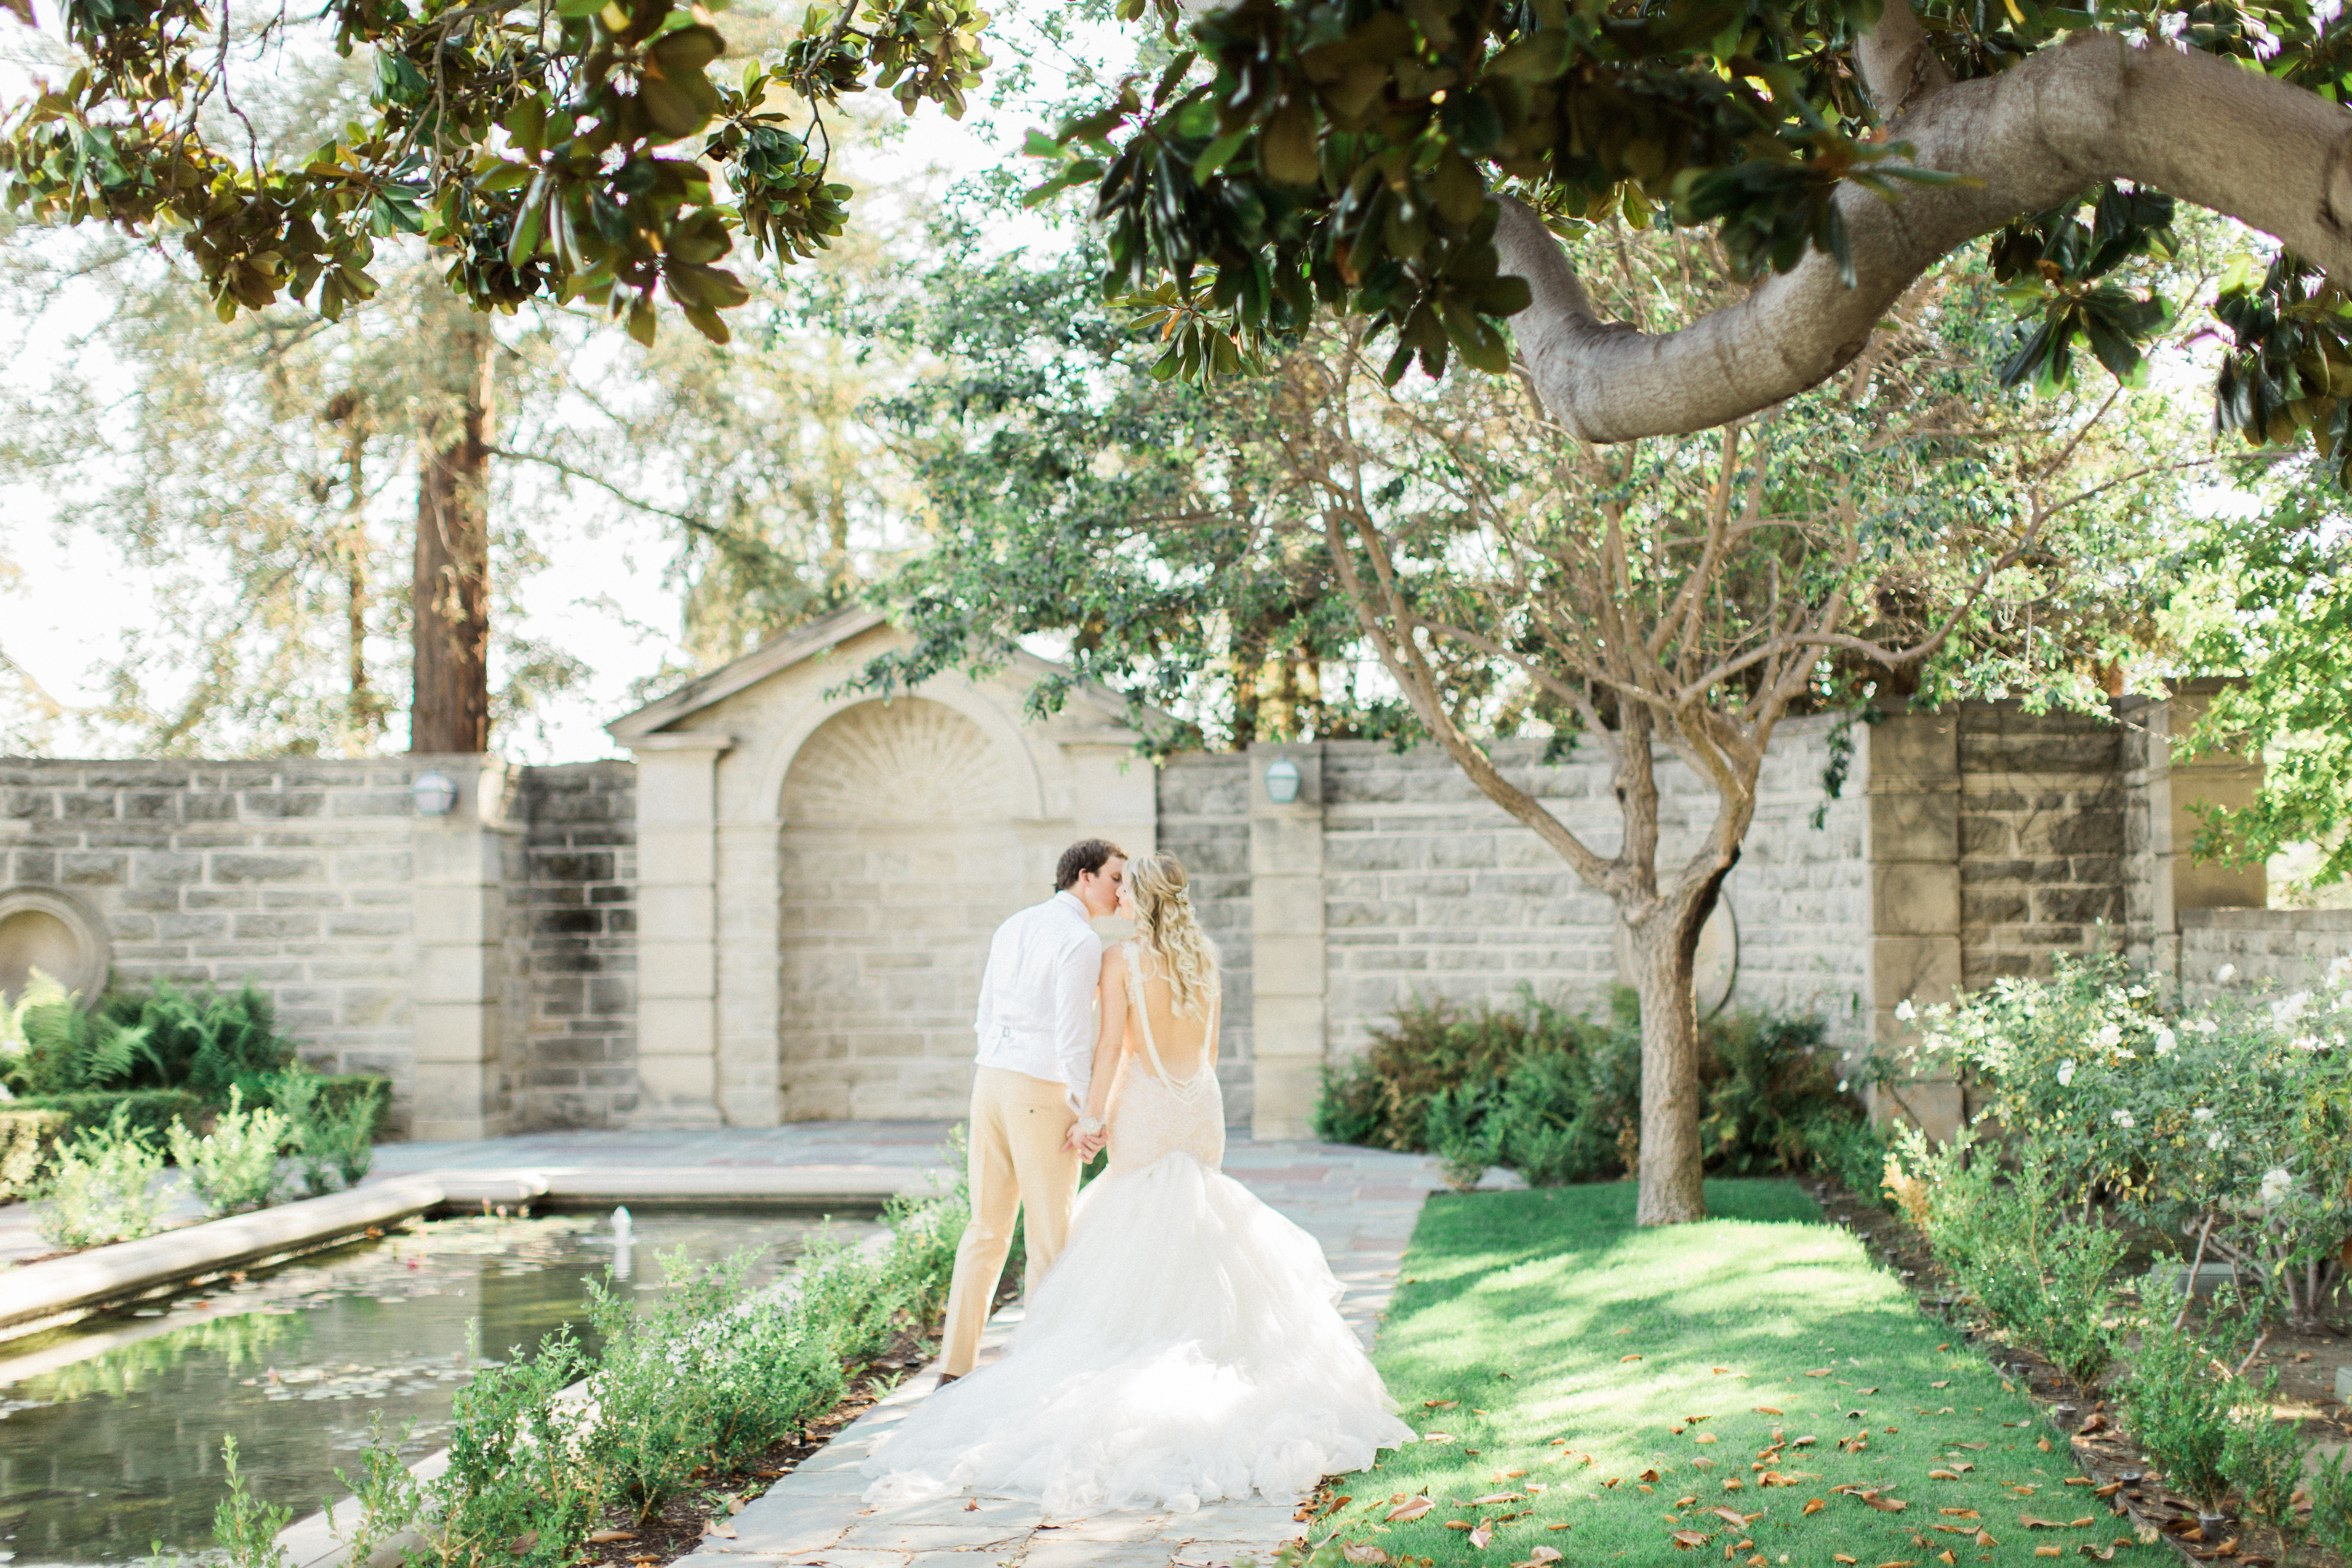 Stealing kisses by the pond at Greystone Mansion! 